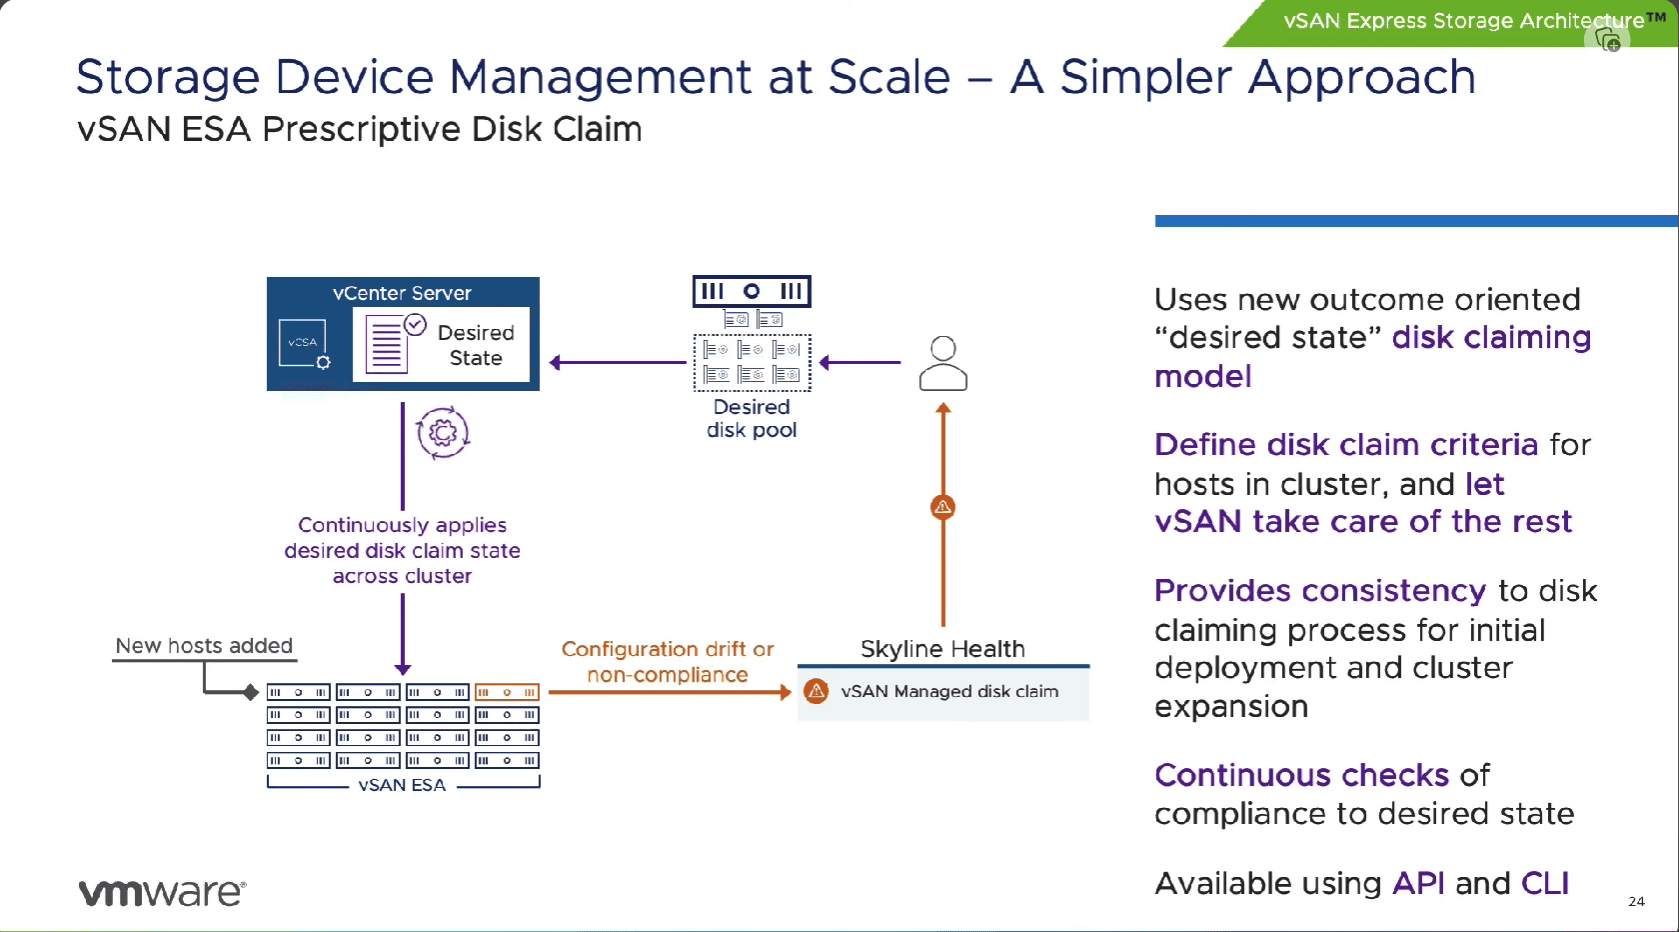 Storage device management at scale